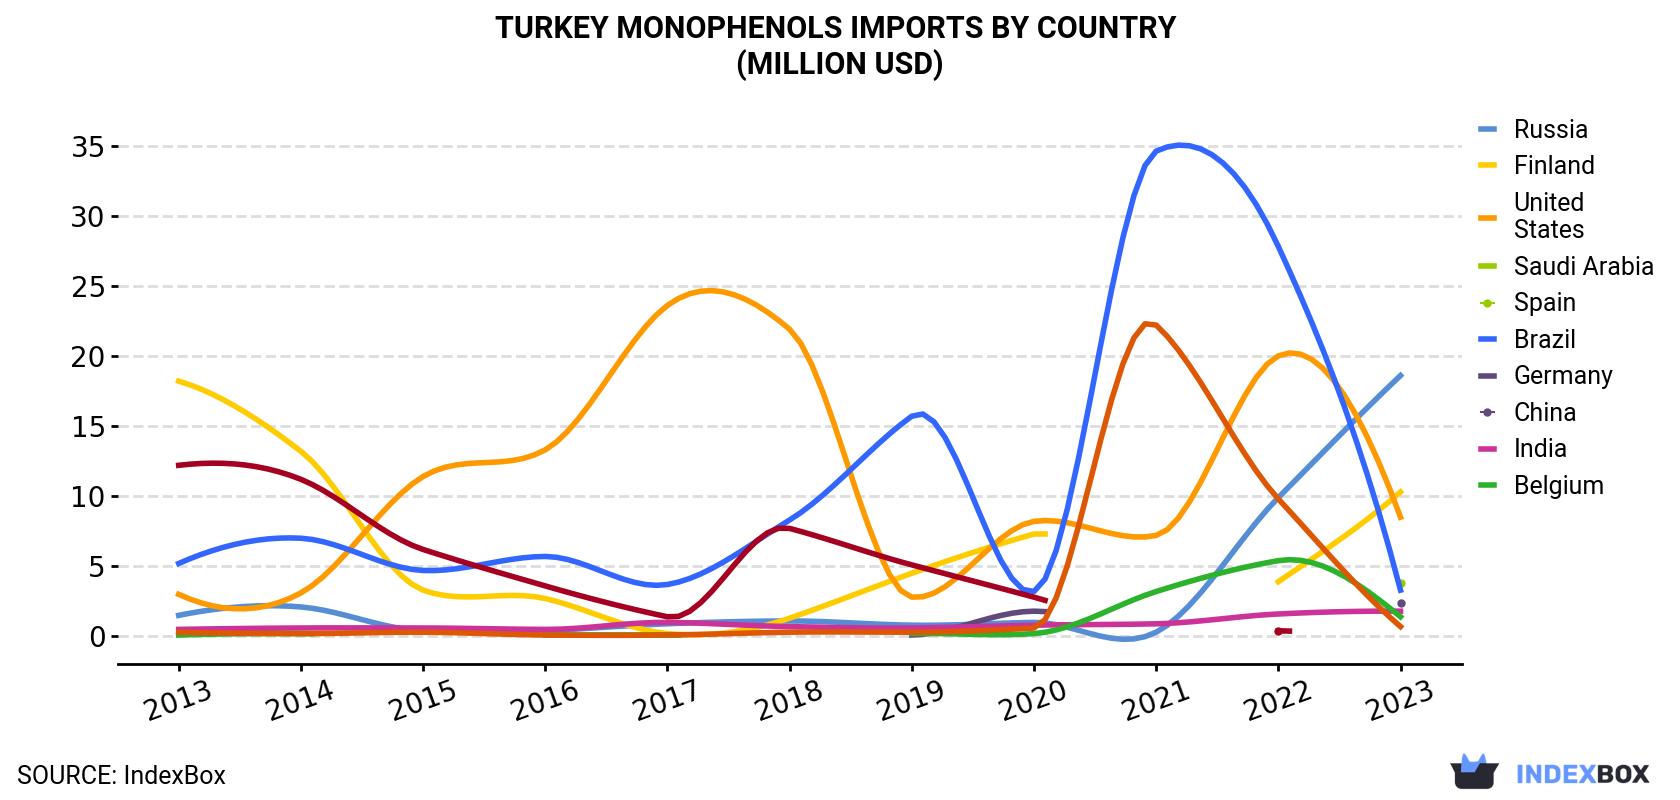 Turkey Monophenols Imports By Country (Million USD)